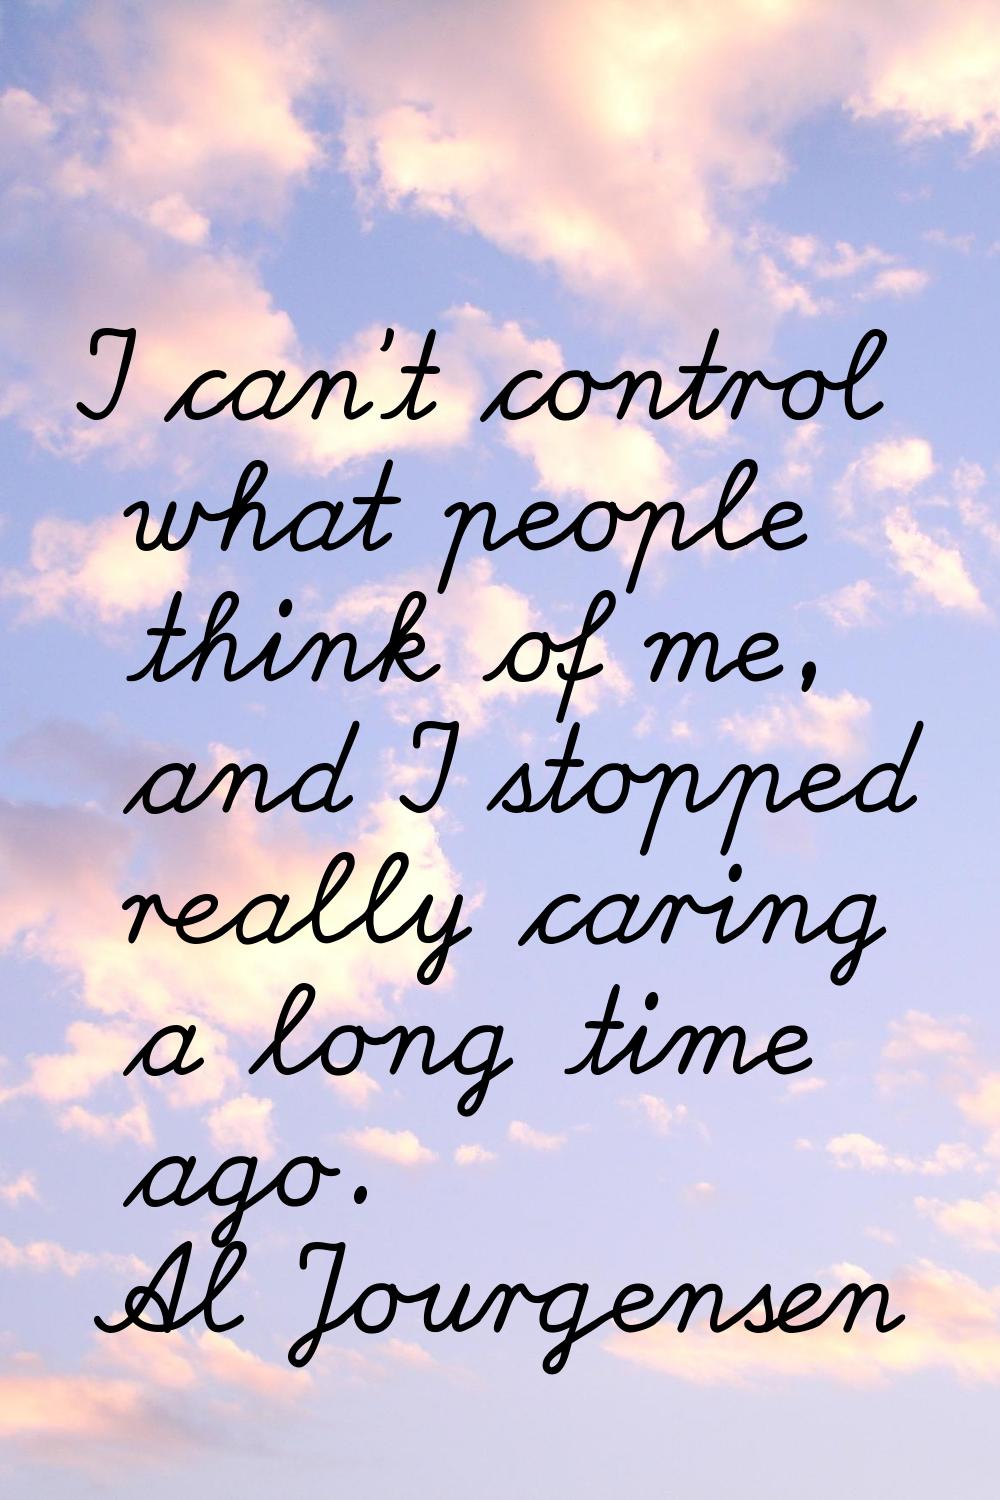 I can't control what people think of me, and I stopped really caring a long time ago.